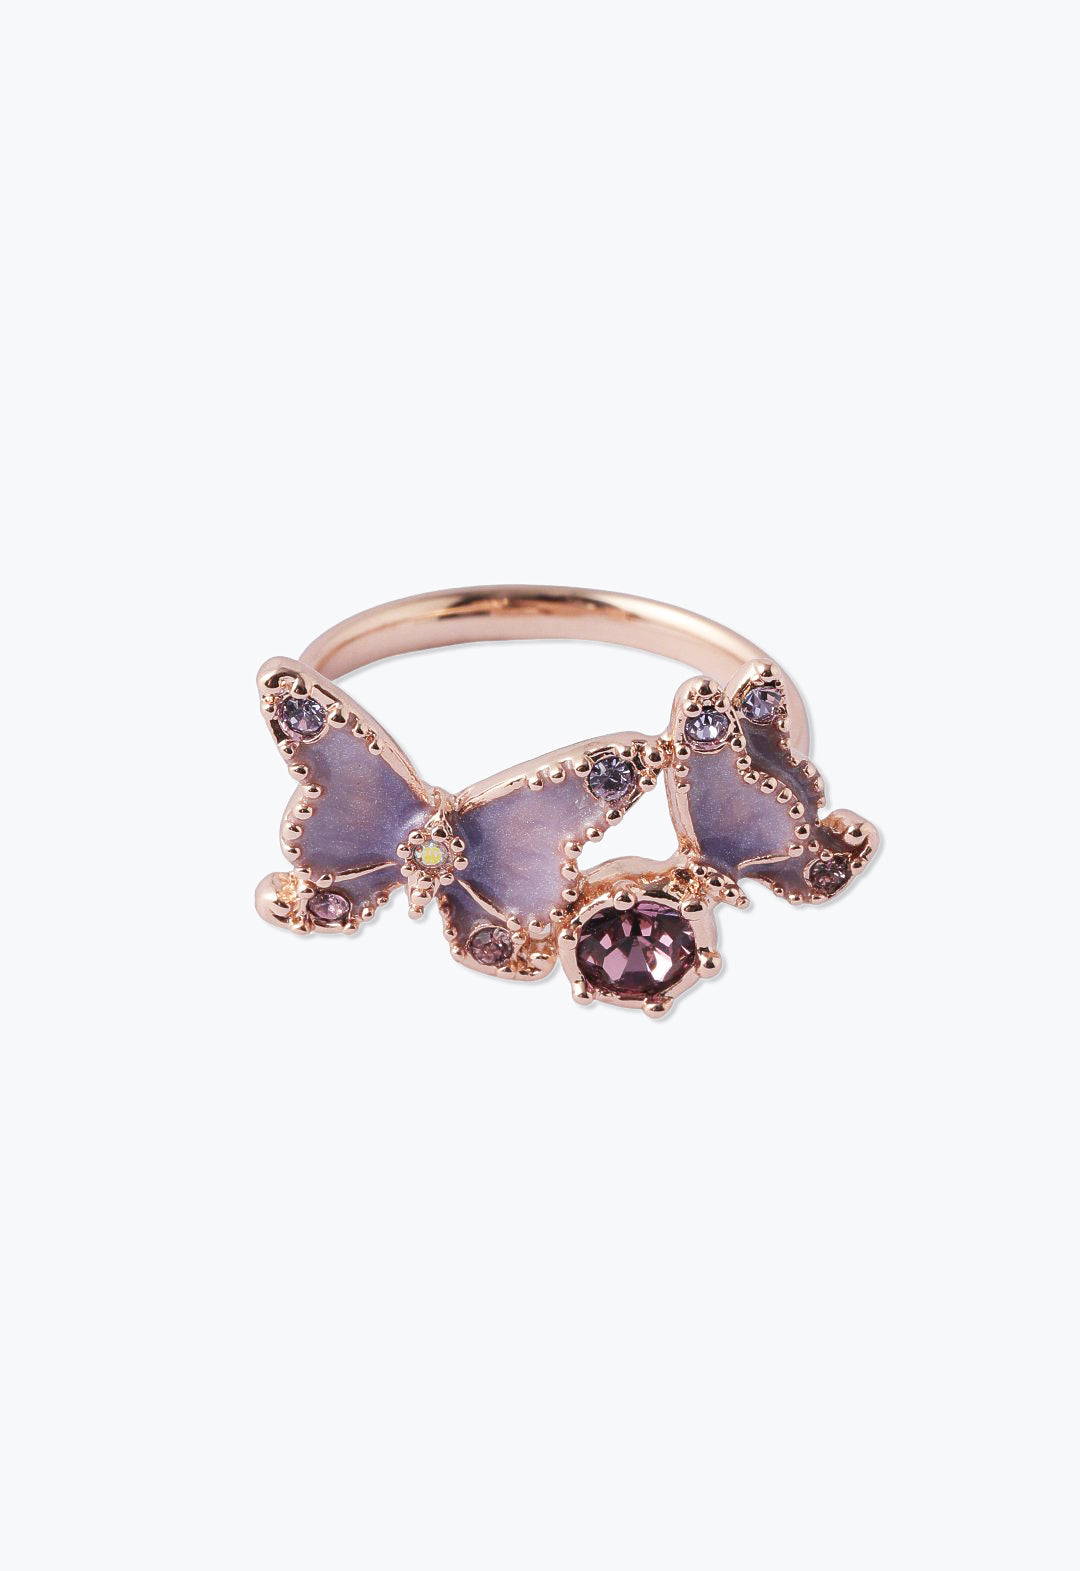 Ring 2-butterflies 1 purple wings open, 1 closed, gemstones at extremity of each, one on the ring flower like